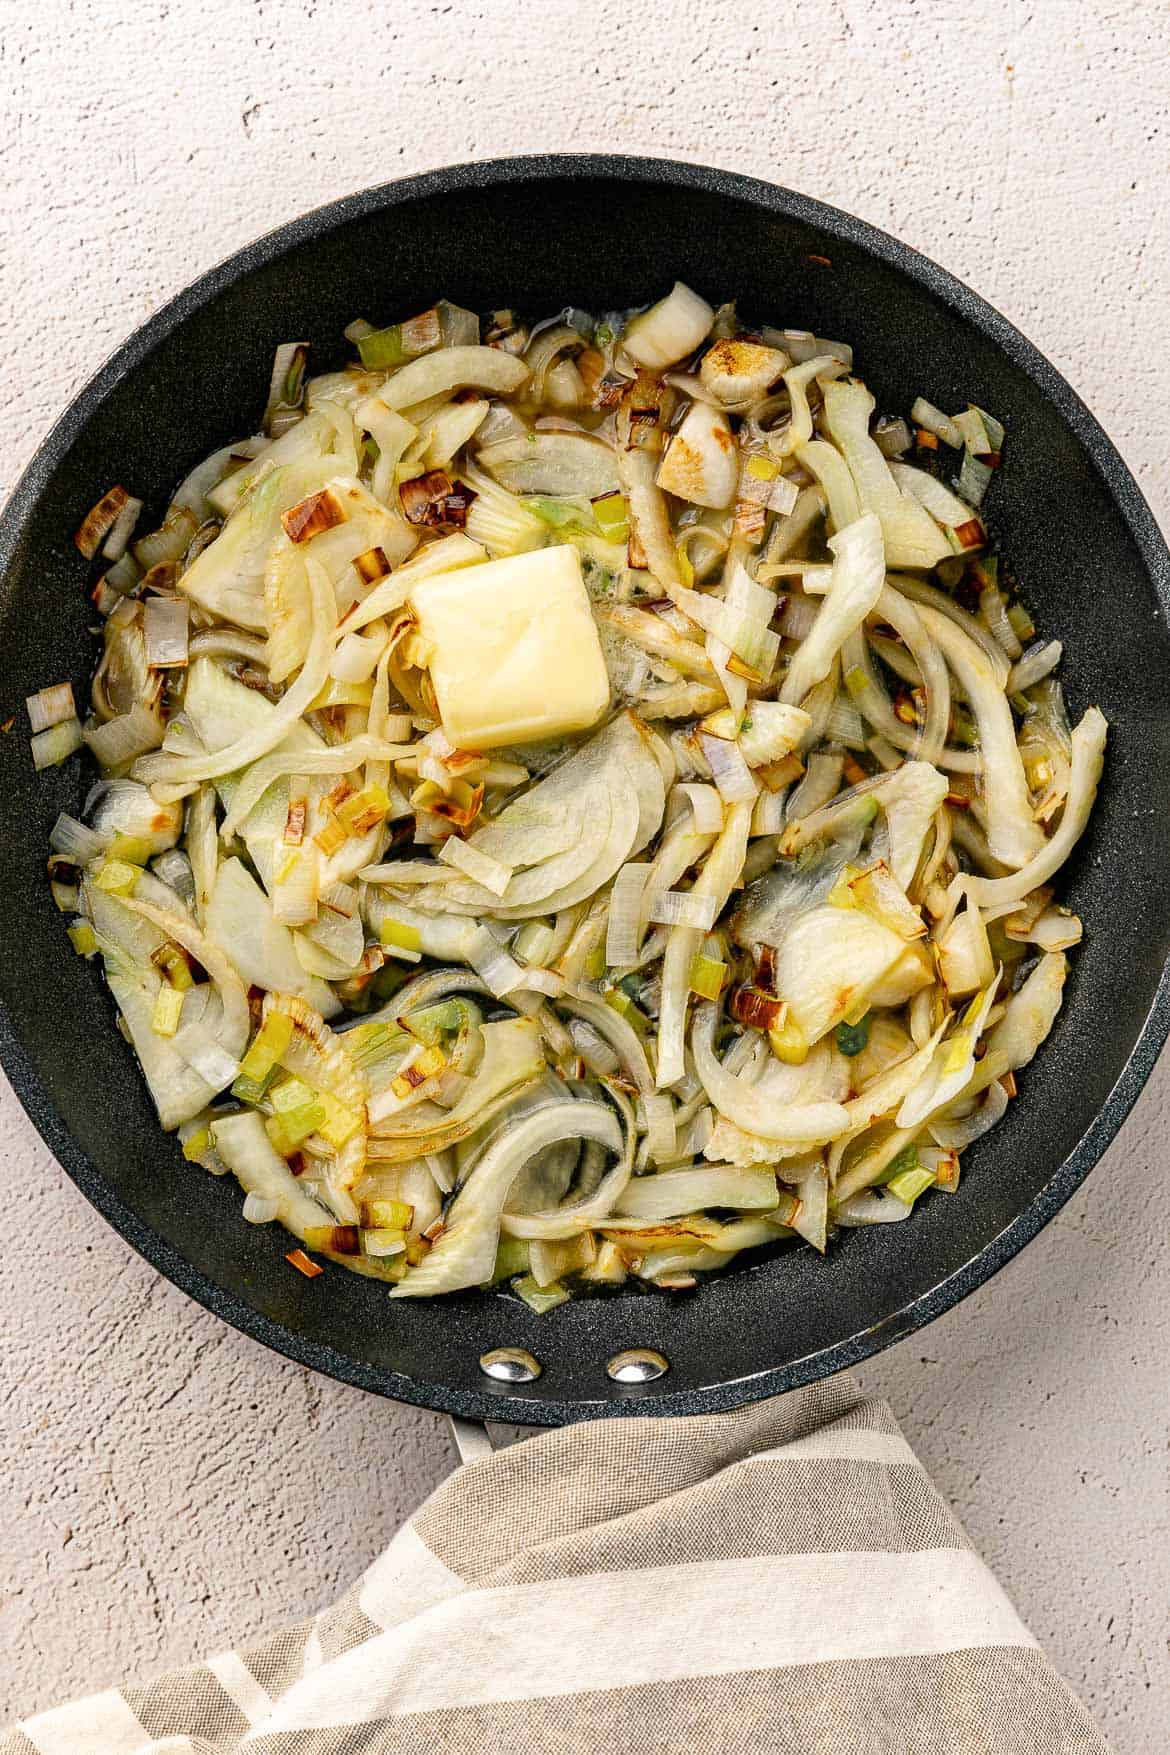 Adding butter to braised fennel and leeks.